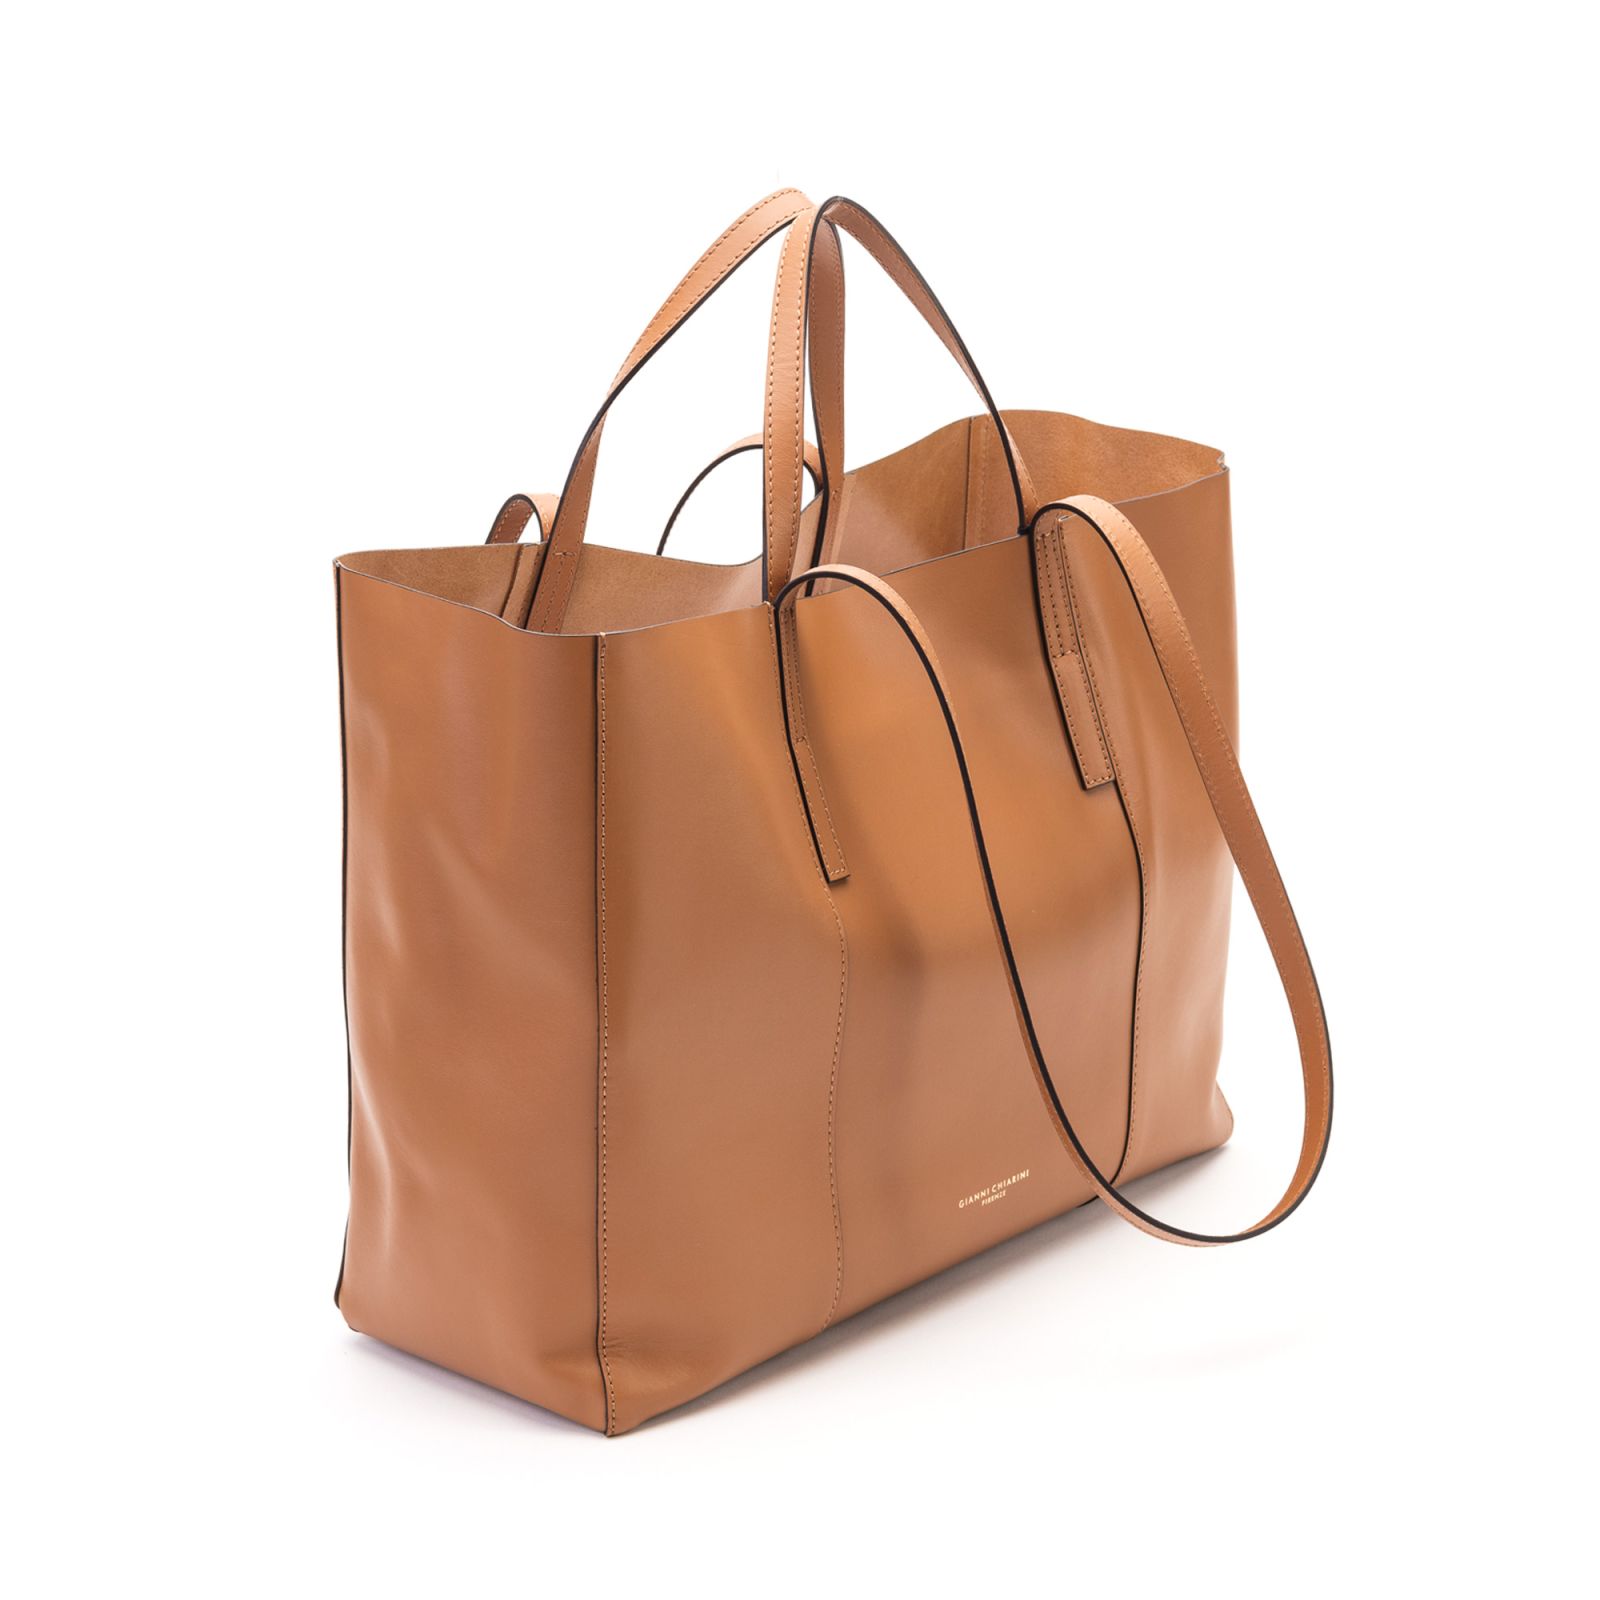 Gianni Chiarini Gianni Chiarini Gianni Chiarini Leather Tote Bag ...